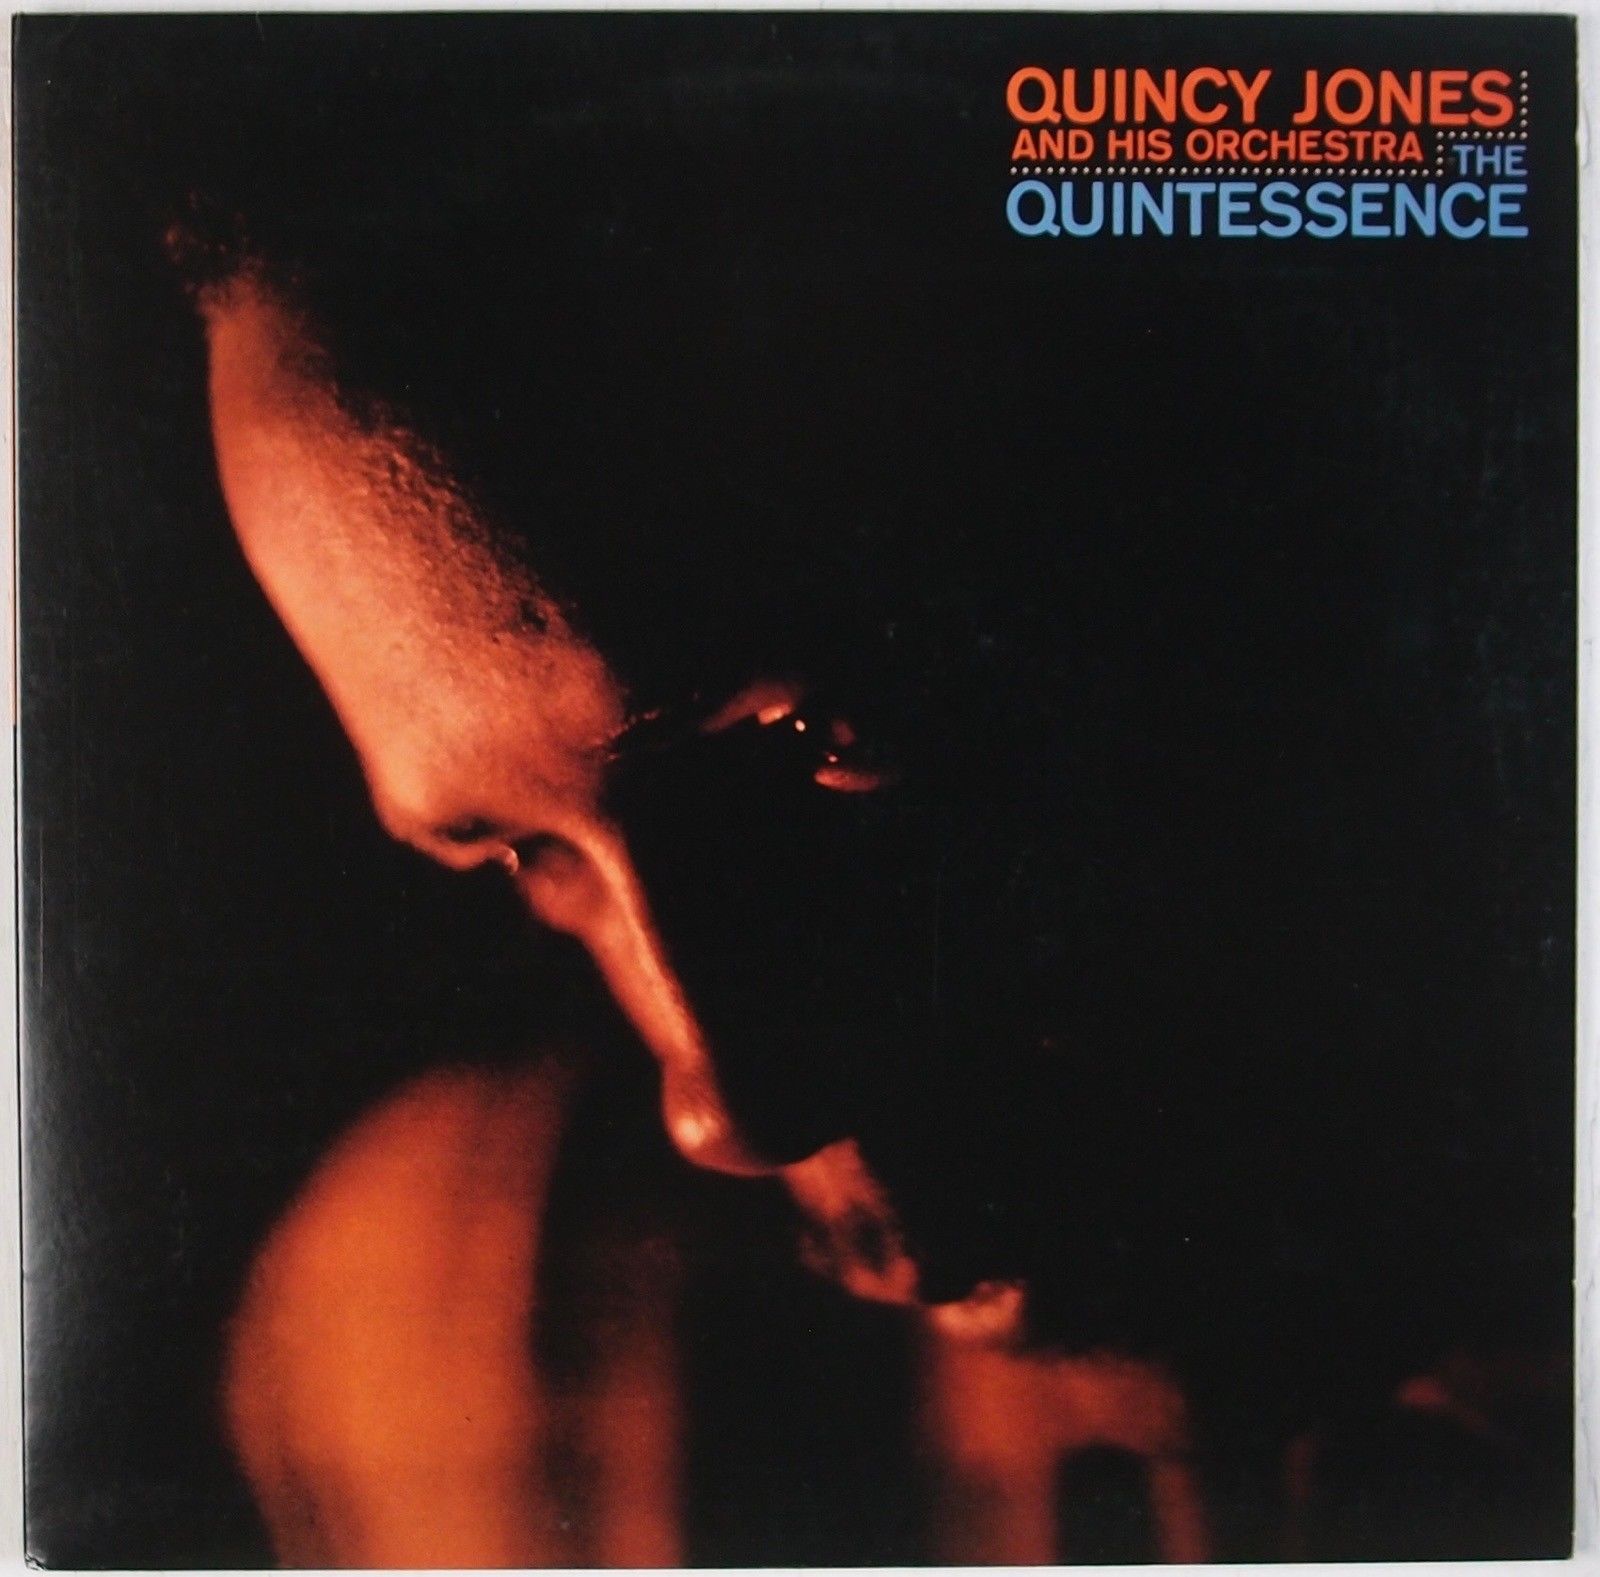 Cover of The Quintessence